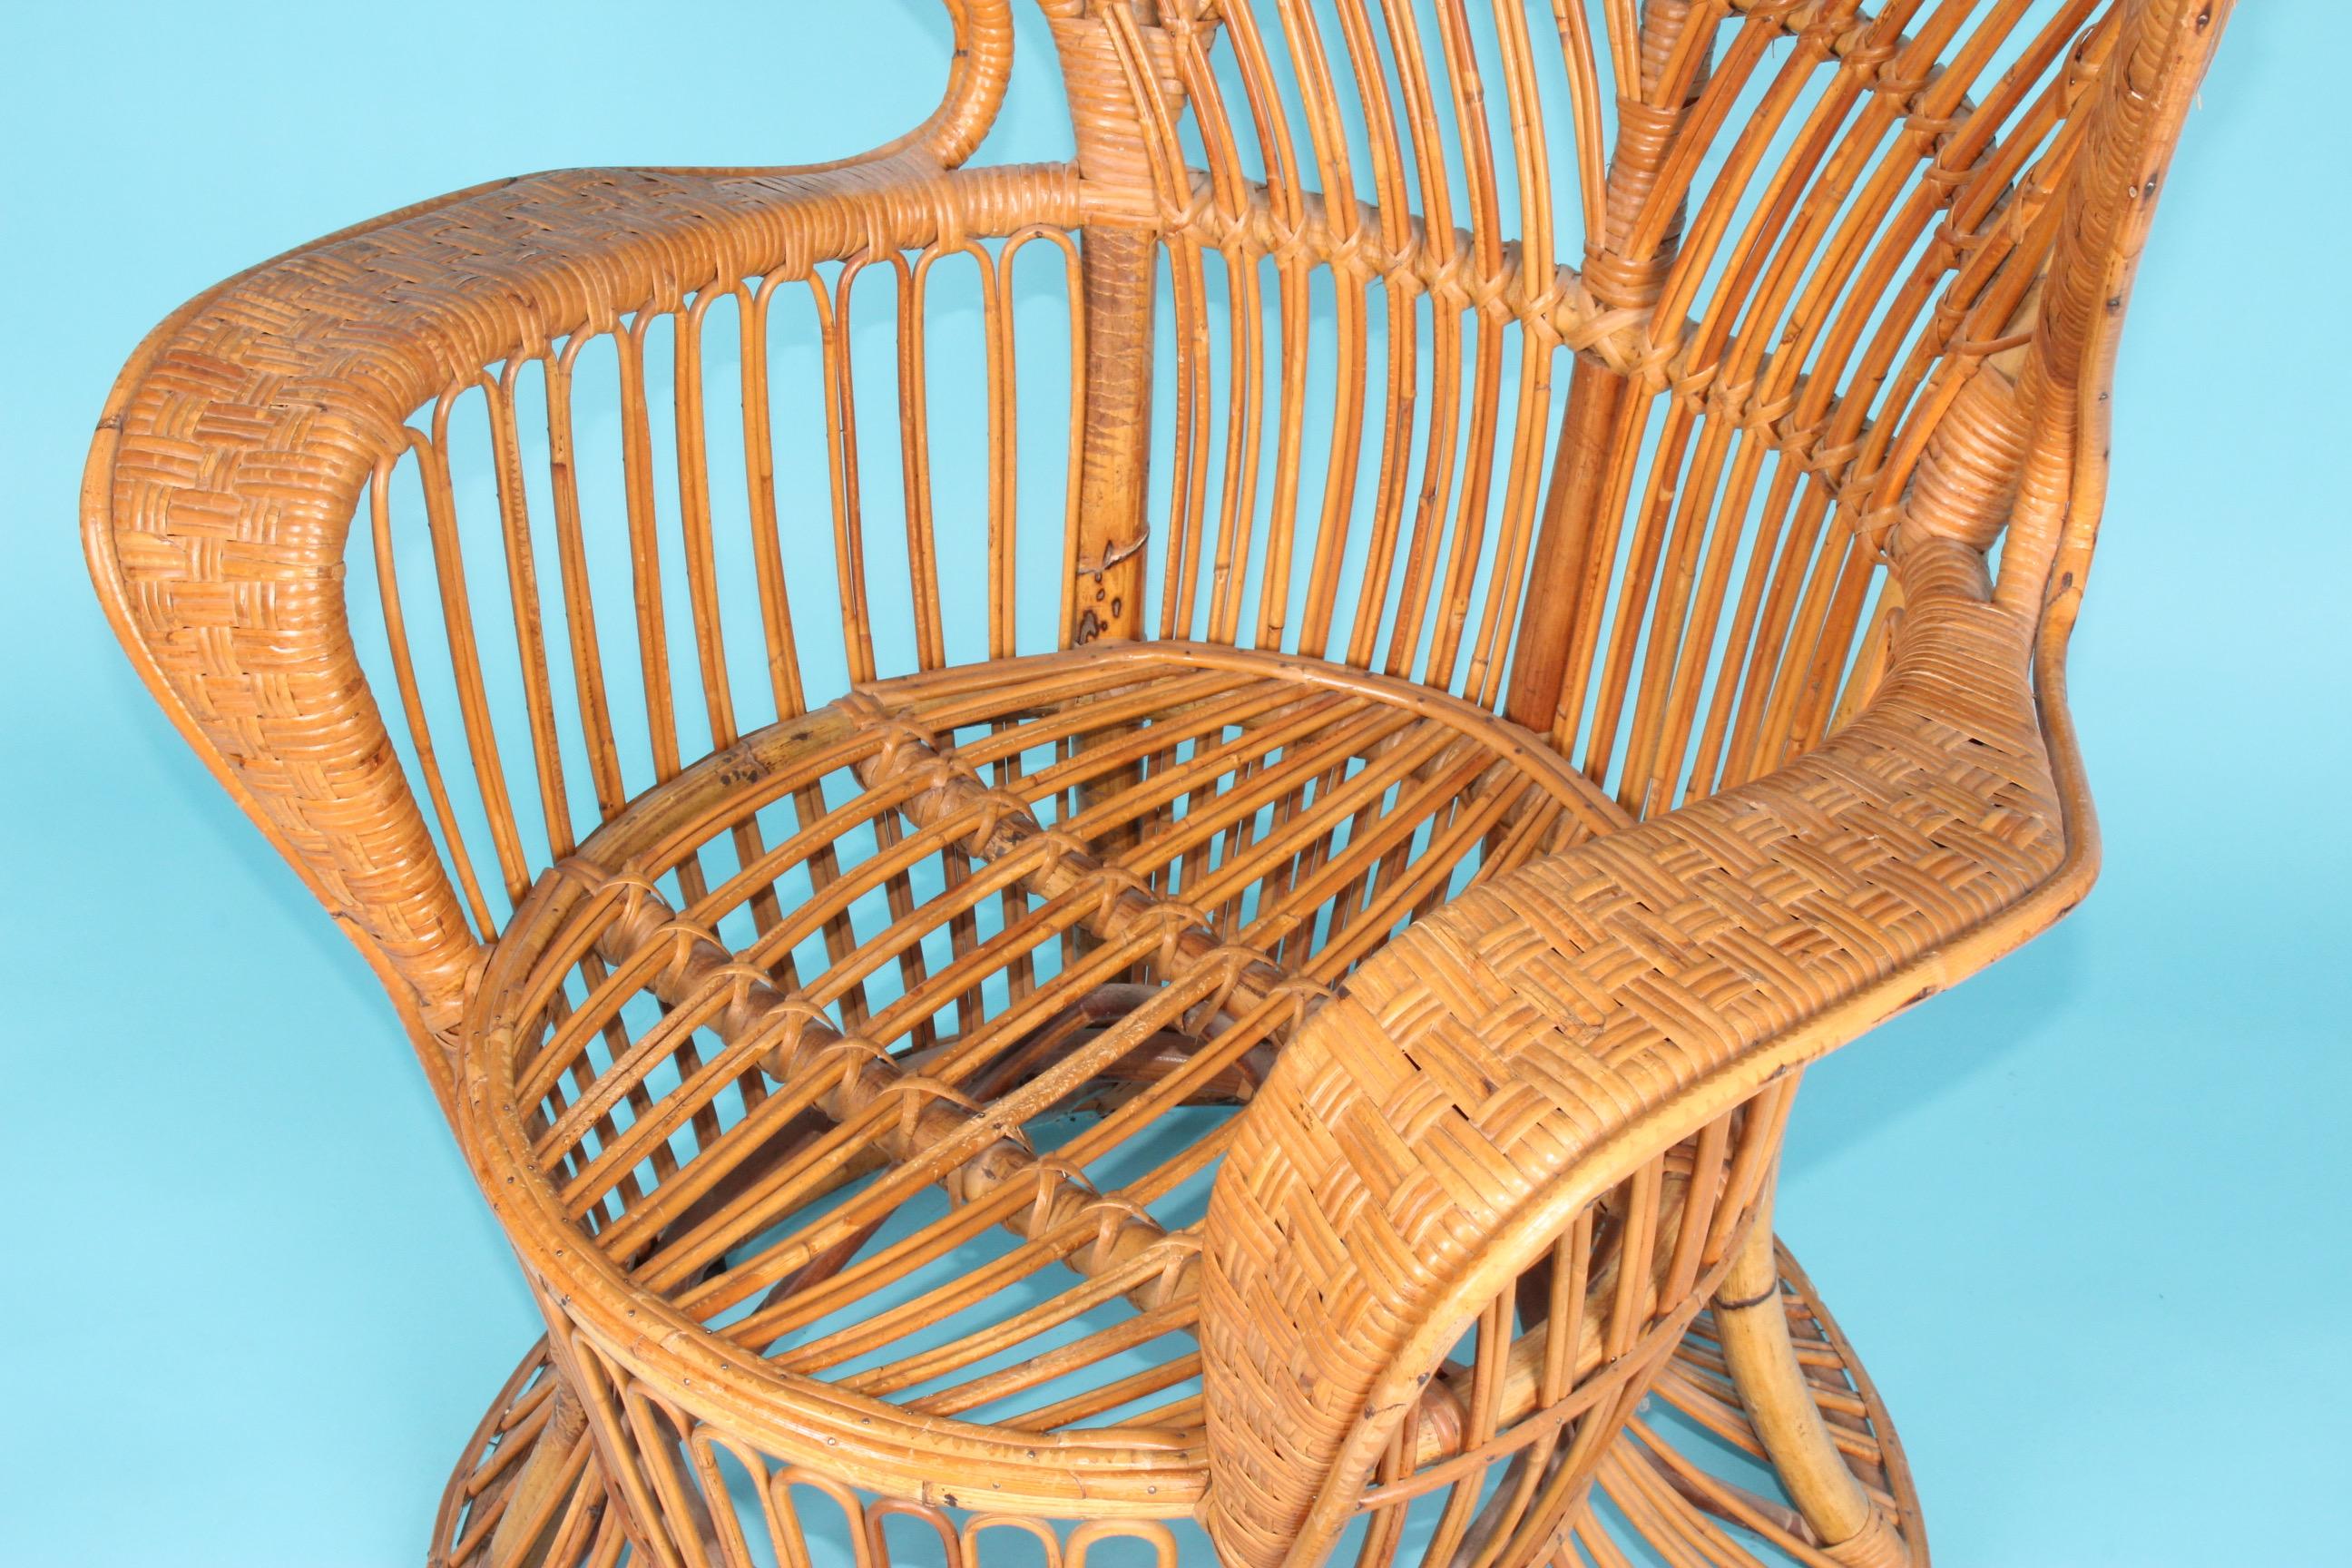 Rattan armchair designed by Lio Carminati, small damage on the top back side see photo.